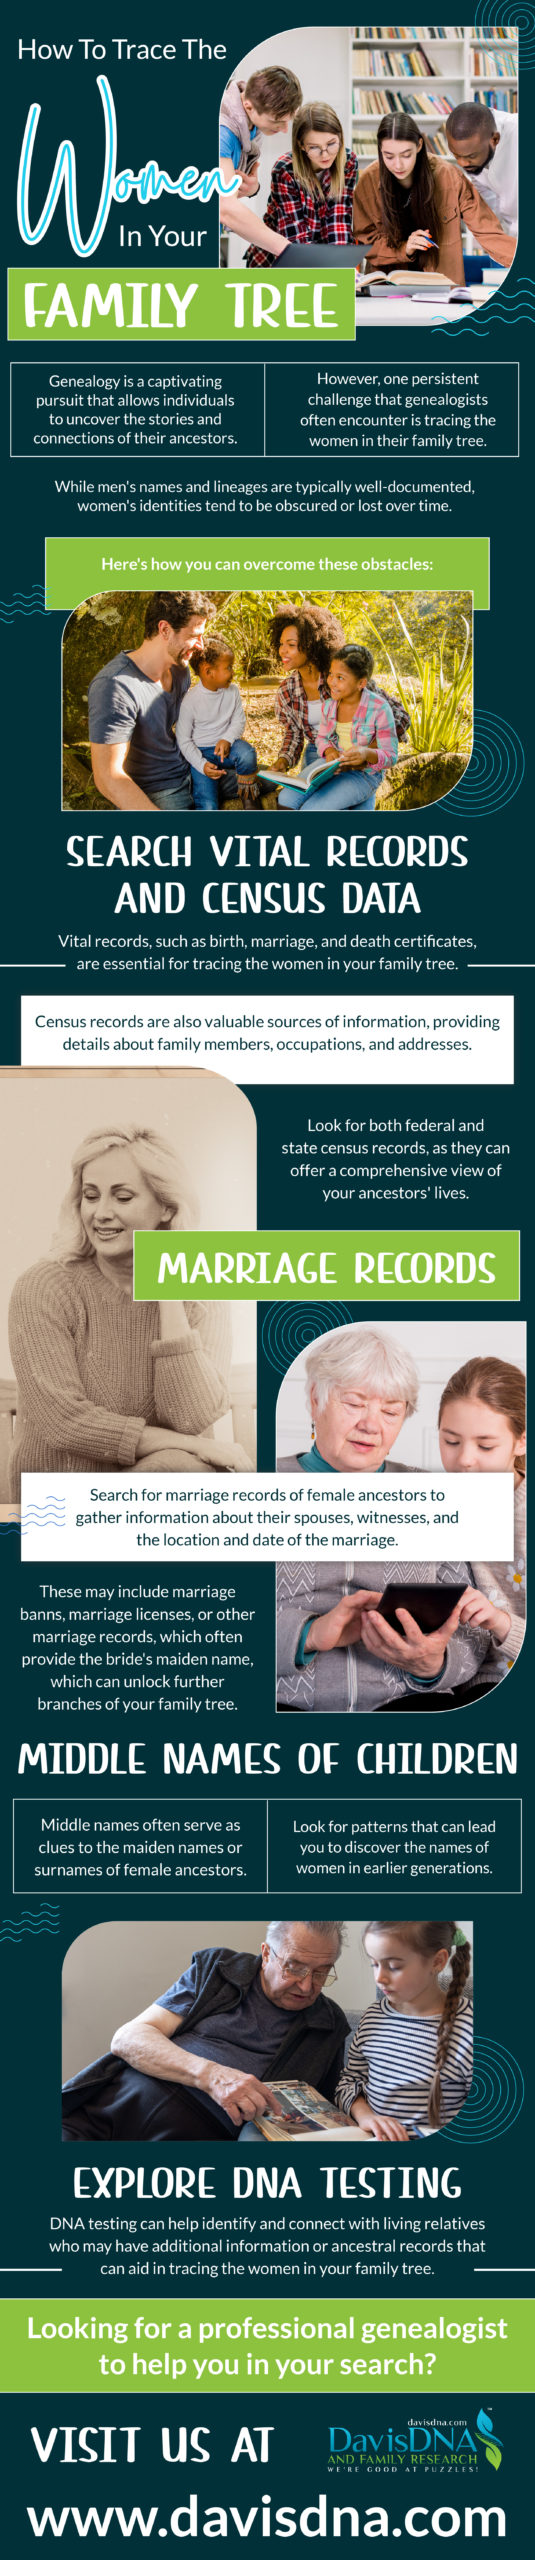 How To Trace The Women In Your FAMILY TREE